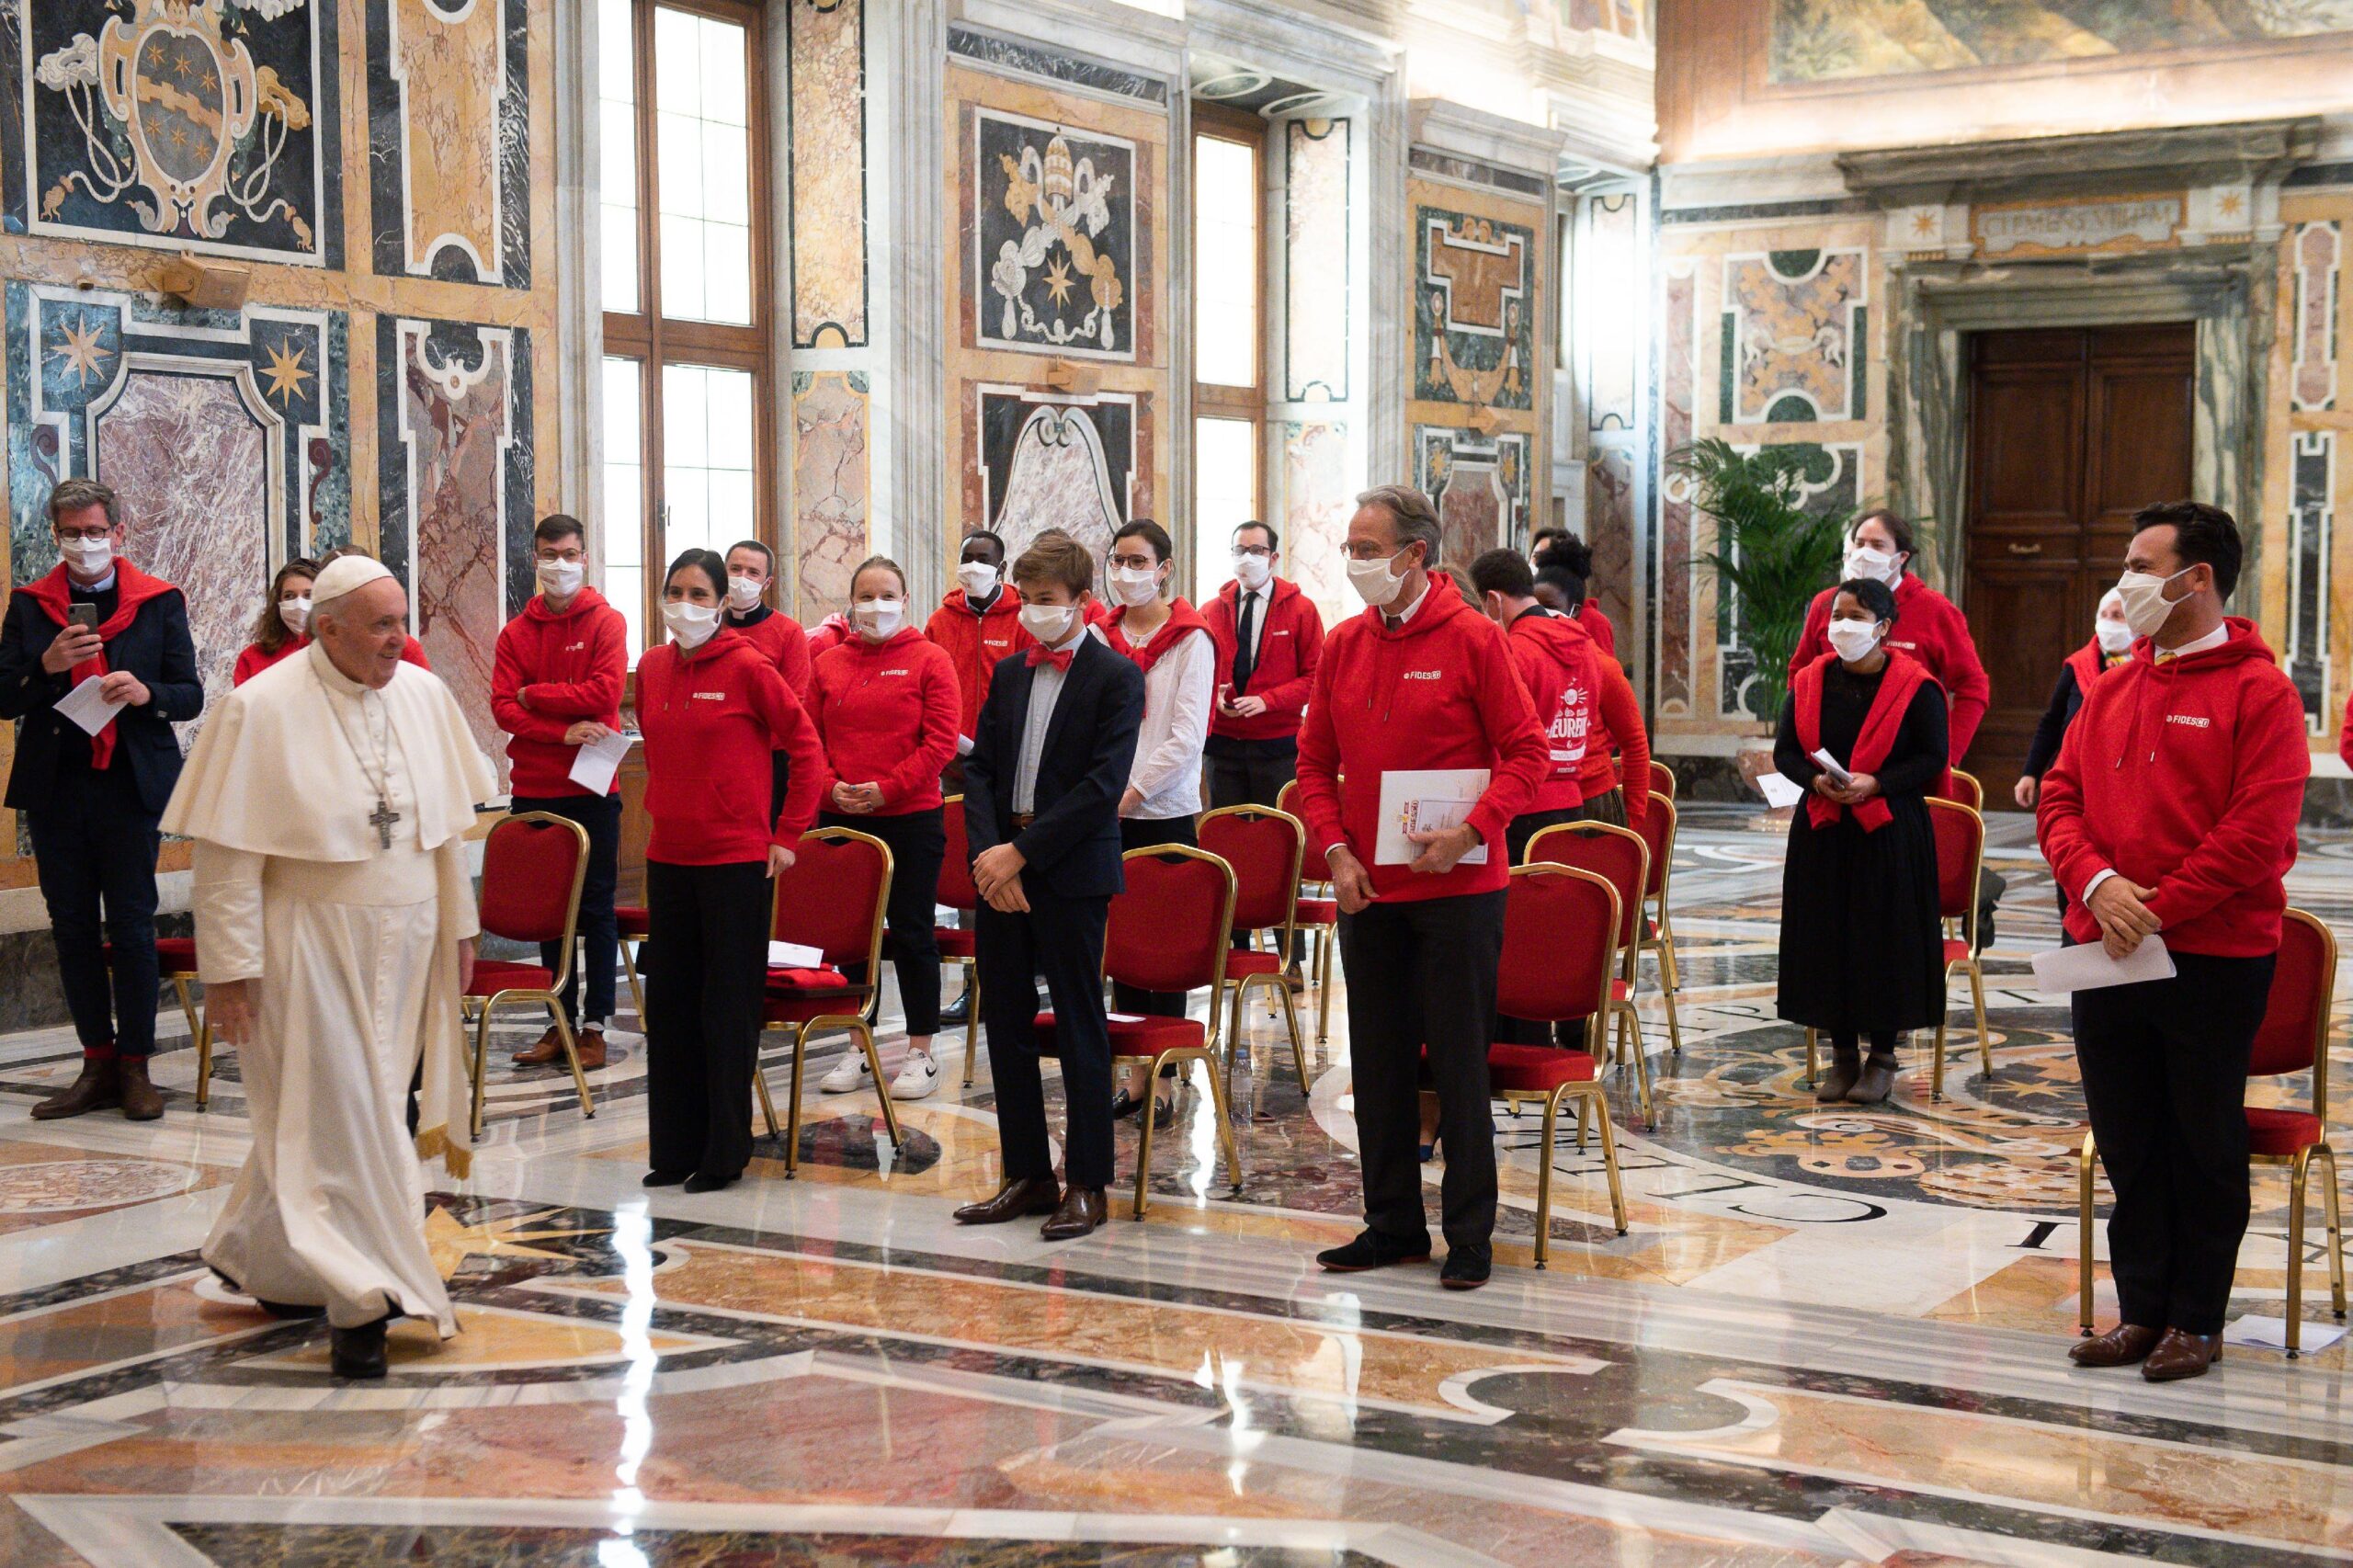 Pope Francis arrives for an audience with members of Fidesco at the Vatican March 20, 2021. Fidesco is a Catholic organization that recruits and deploys people for missionary and development work. (OSV News photo/Vatican Media)